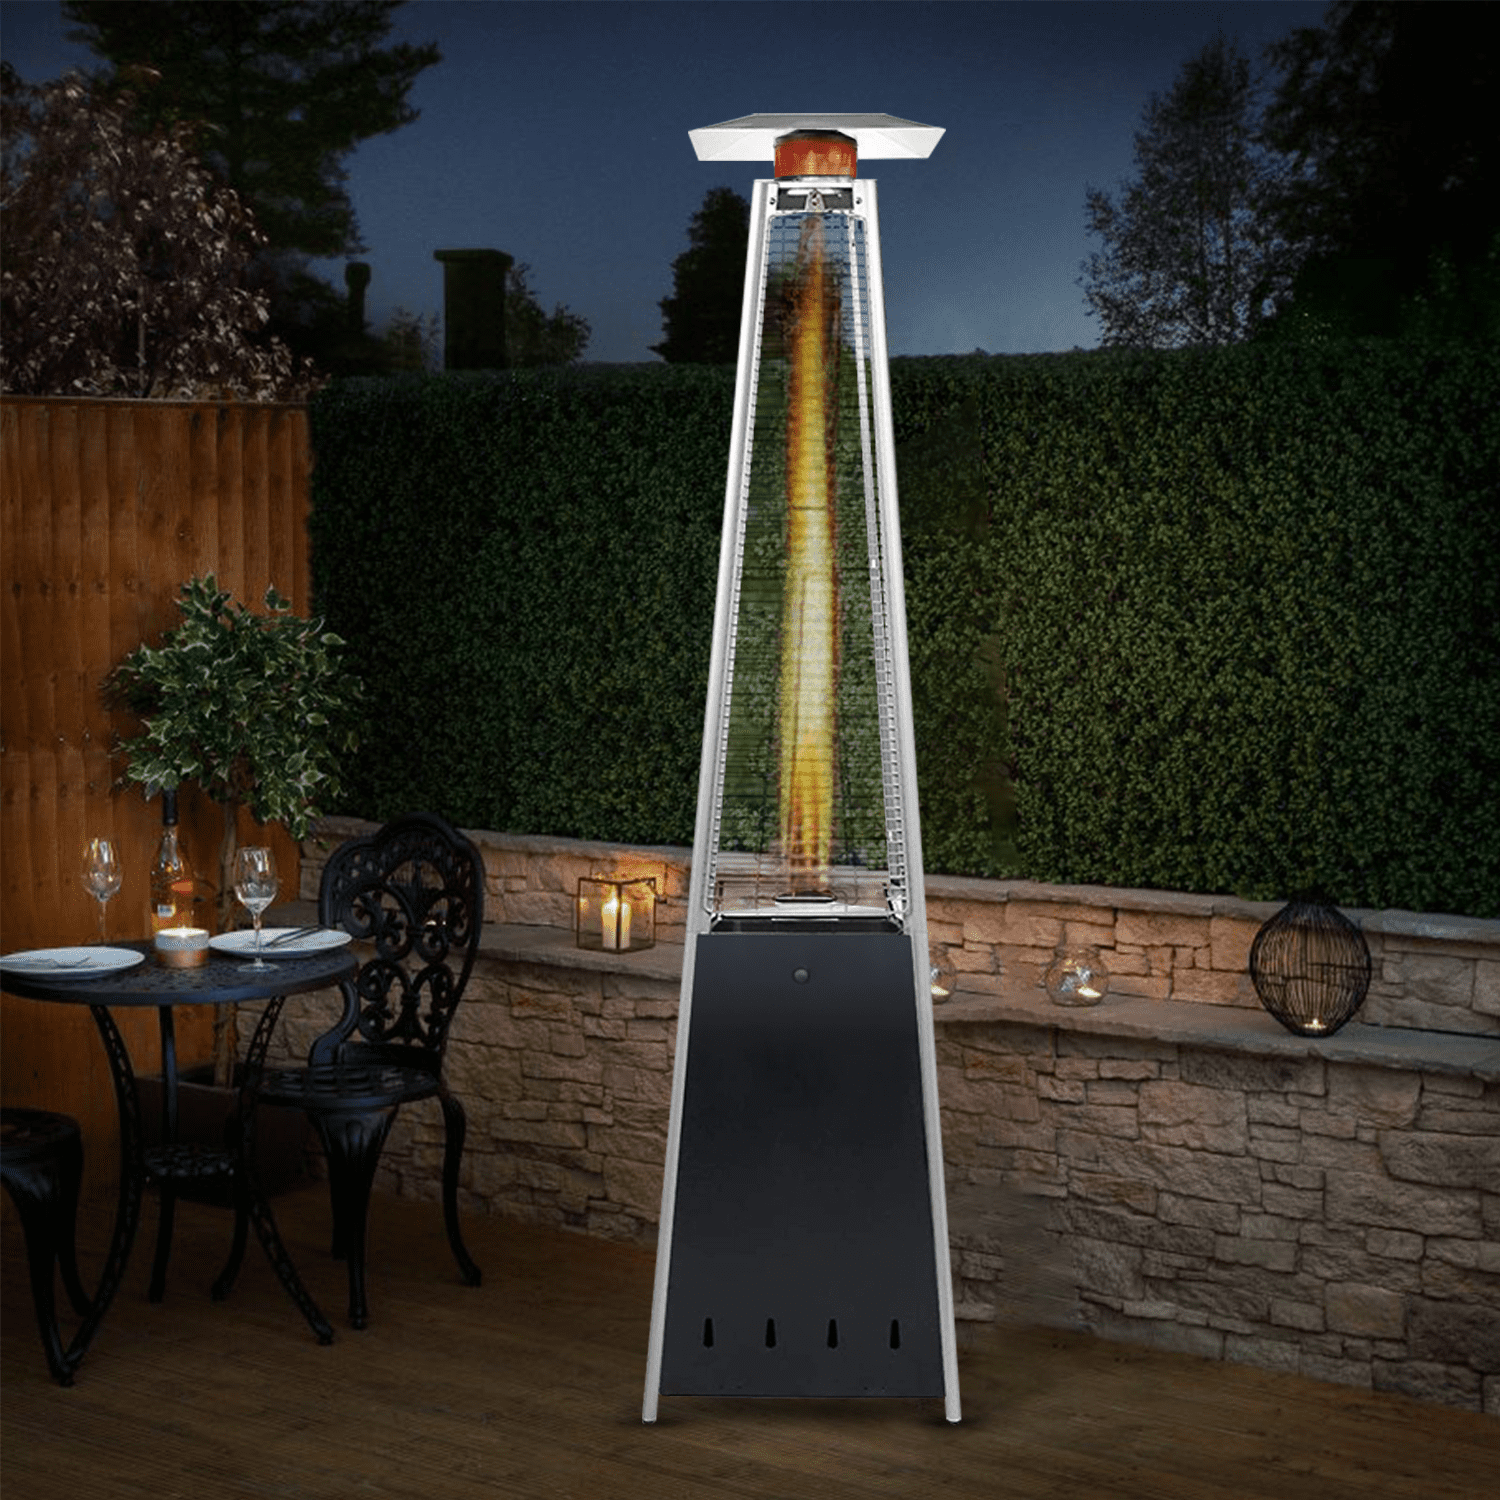 LPG Warm Heating Fire & Water Proof Cover Included Portable Wheels Garden Camp BU-KO Outdoor Patio Gas Heater Regulator & Hose Stainless Steel Pyramid Style 13kw Propane Burner BBQ Parties